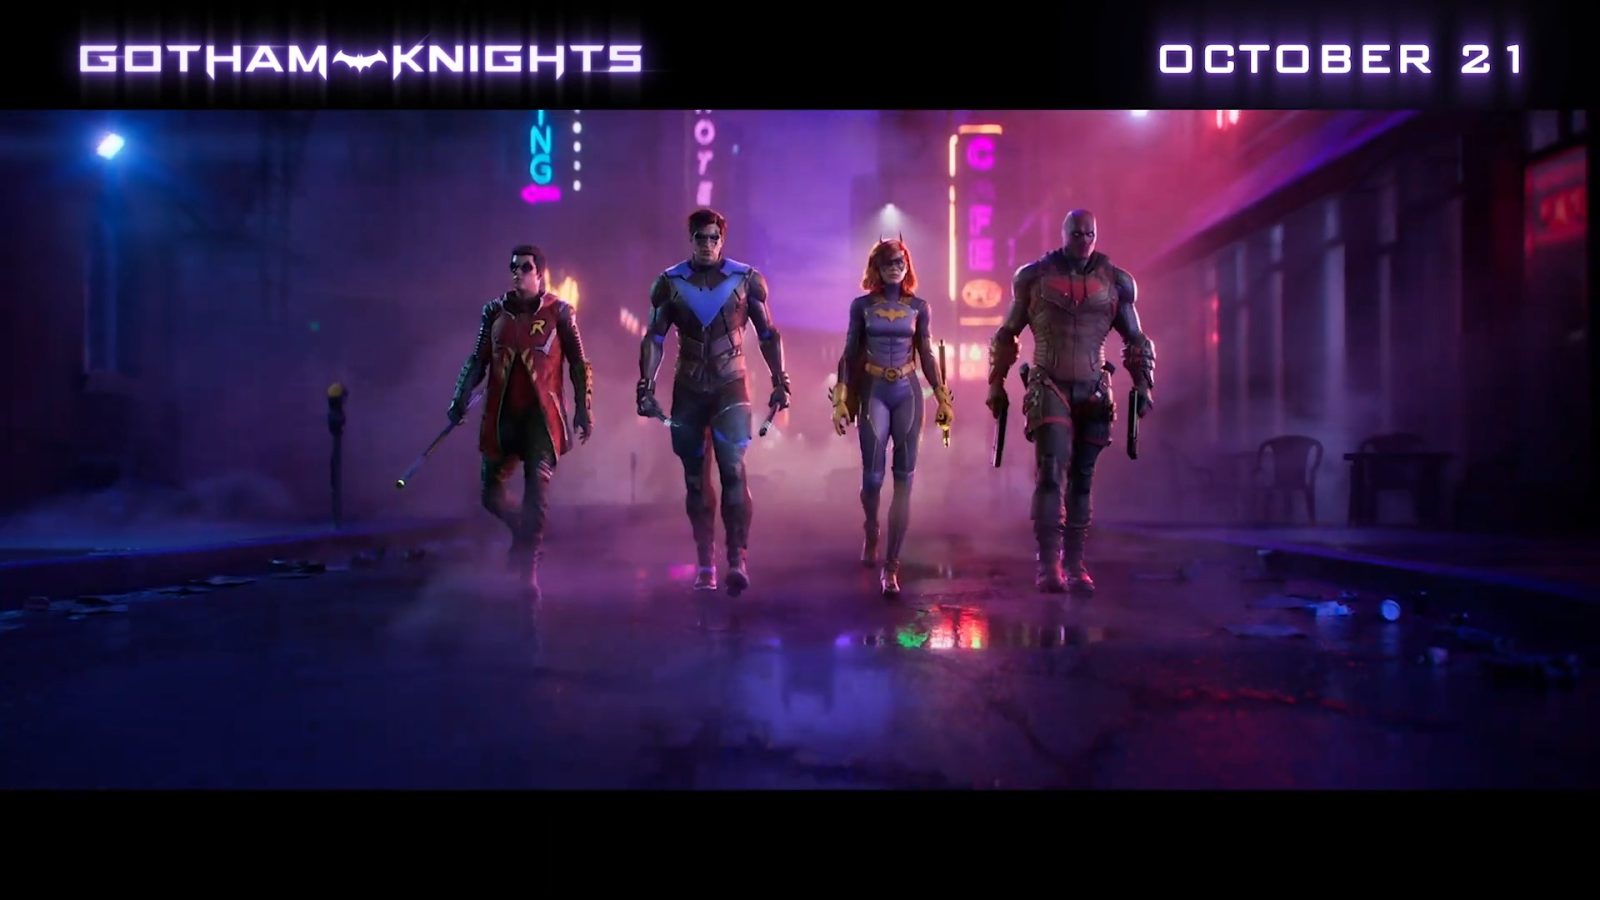 Gotham Knights Story Trailer Reveals the Full Threat of the Court